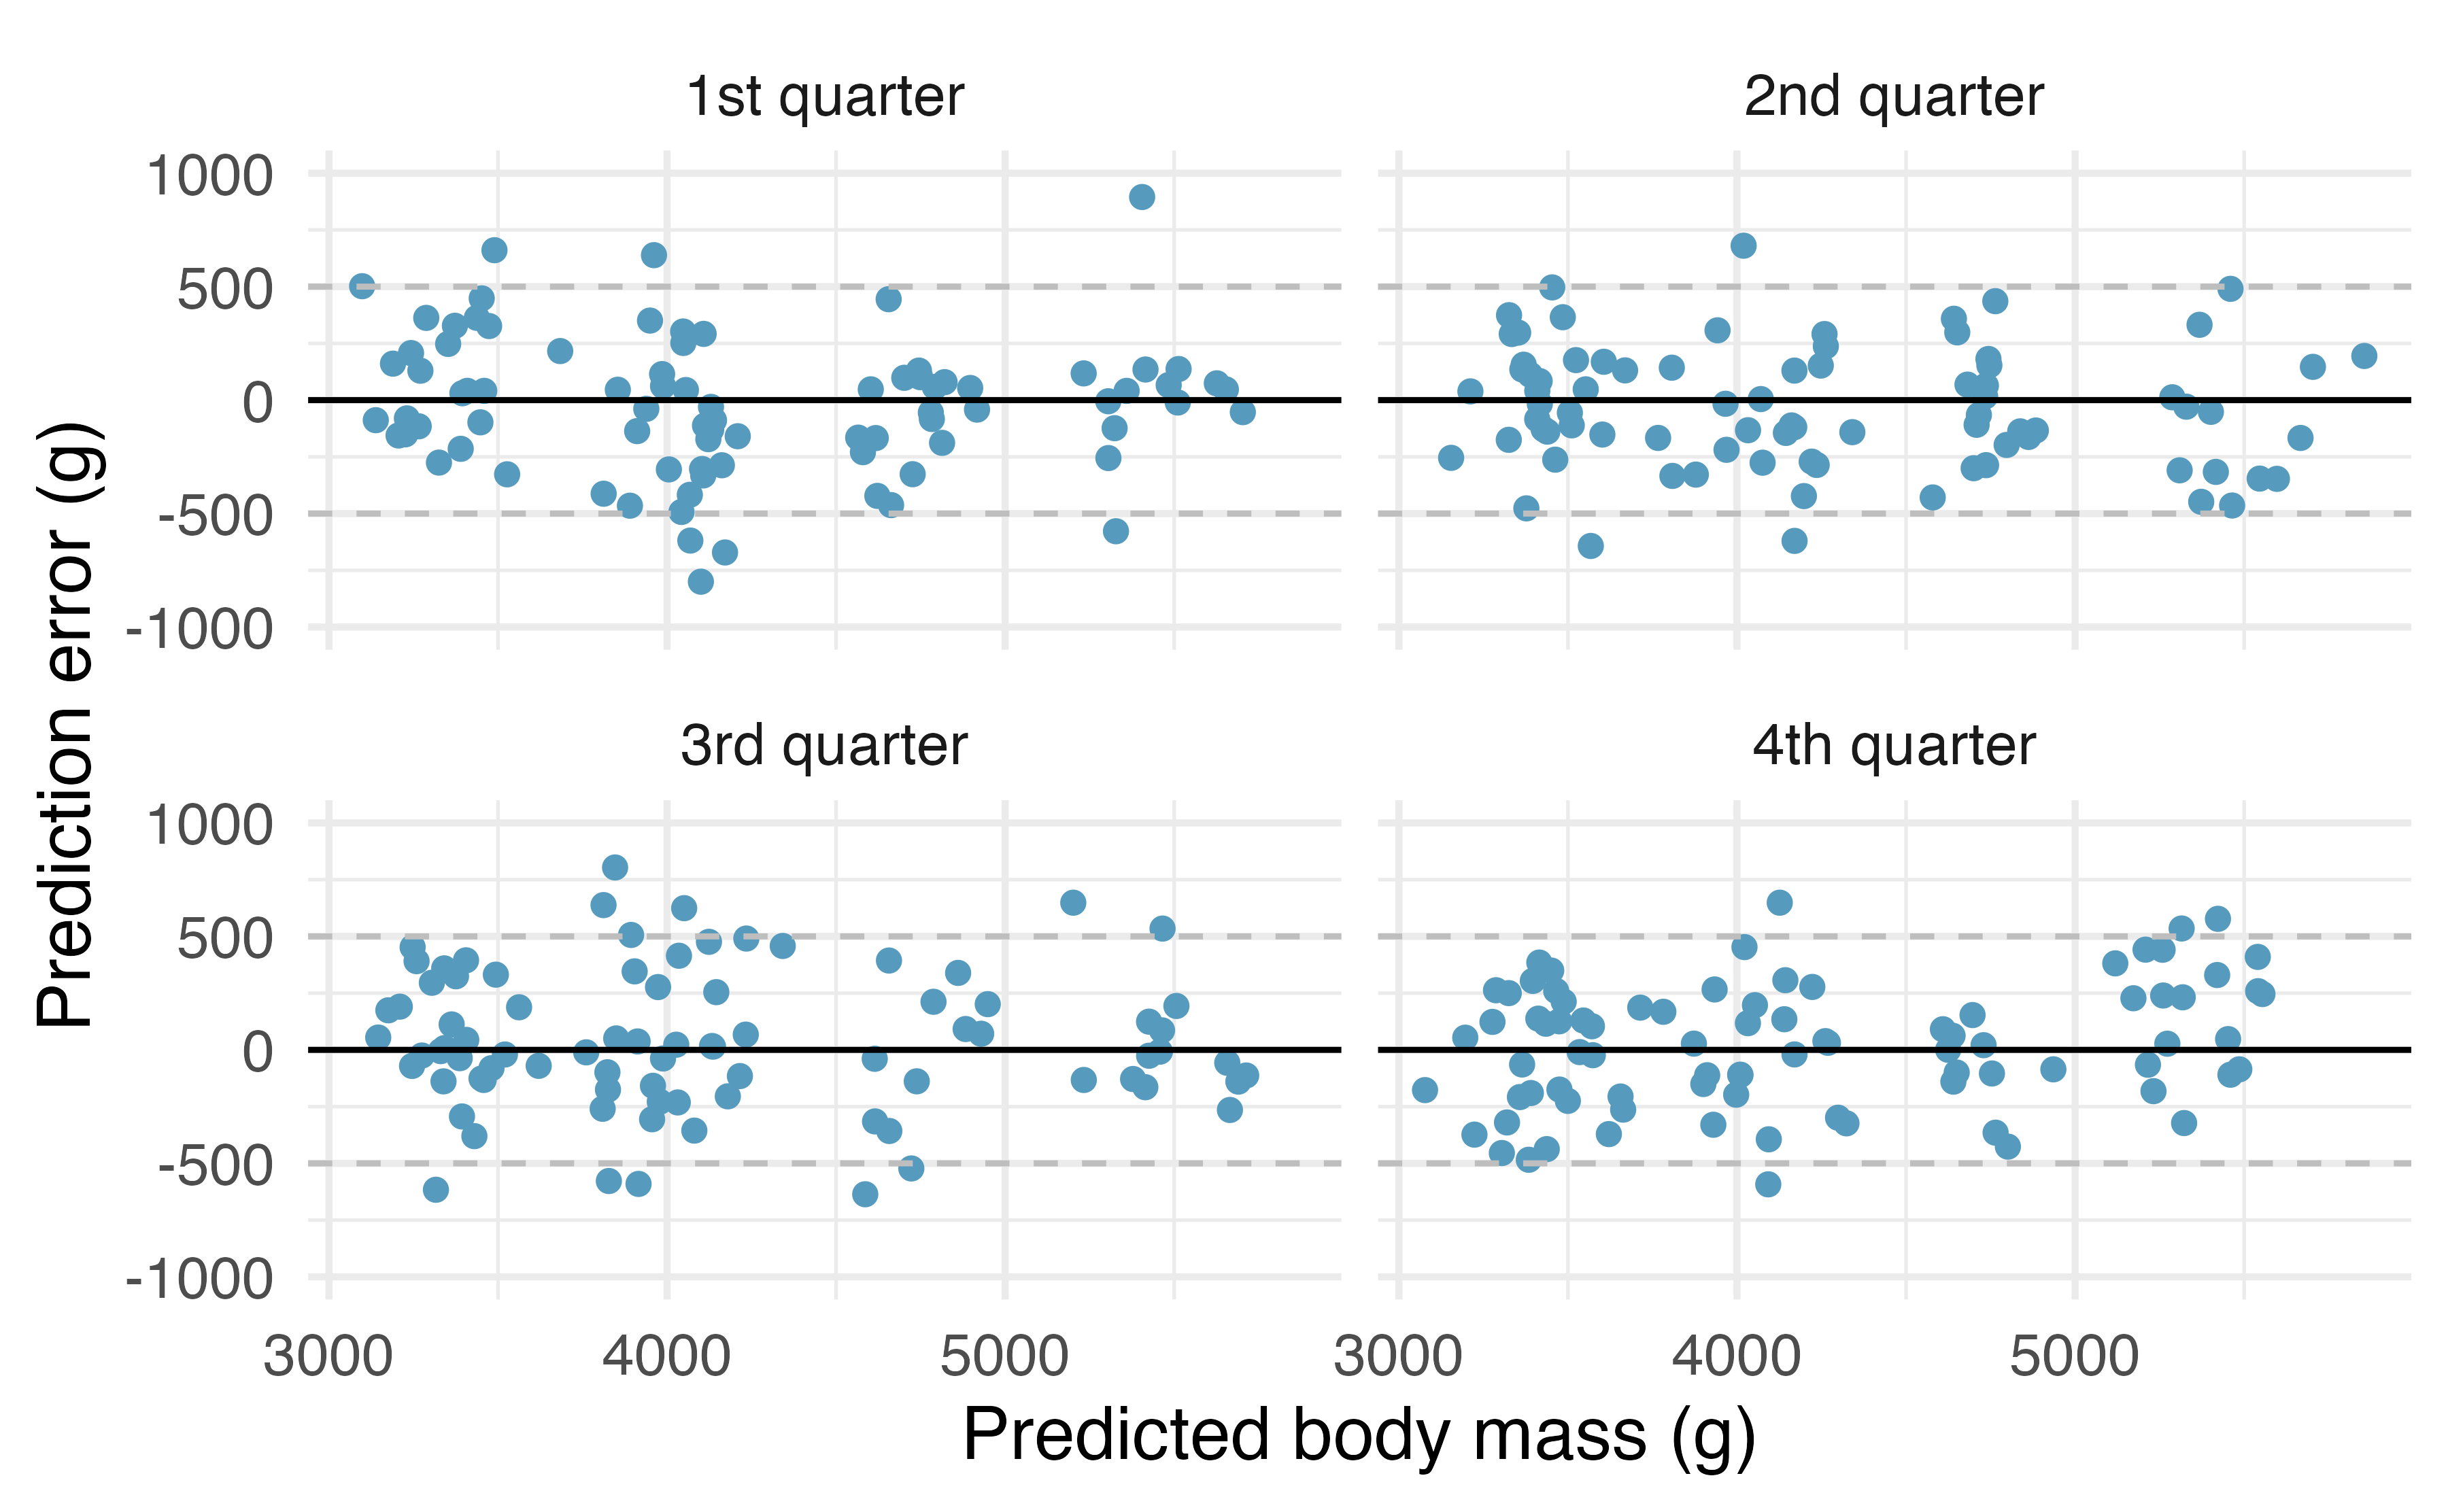 One quarter at a time, the data were removed from the model building, and the body mass of the removed penguins was predicted. The least squares regression model was fit independently of the removed penguins.  The predictions of body mass are based on bill length only. The x-axis represents the predicted value, the y-axis represents the error (difference between predicted value and actual value).